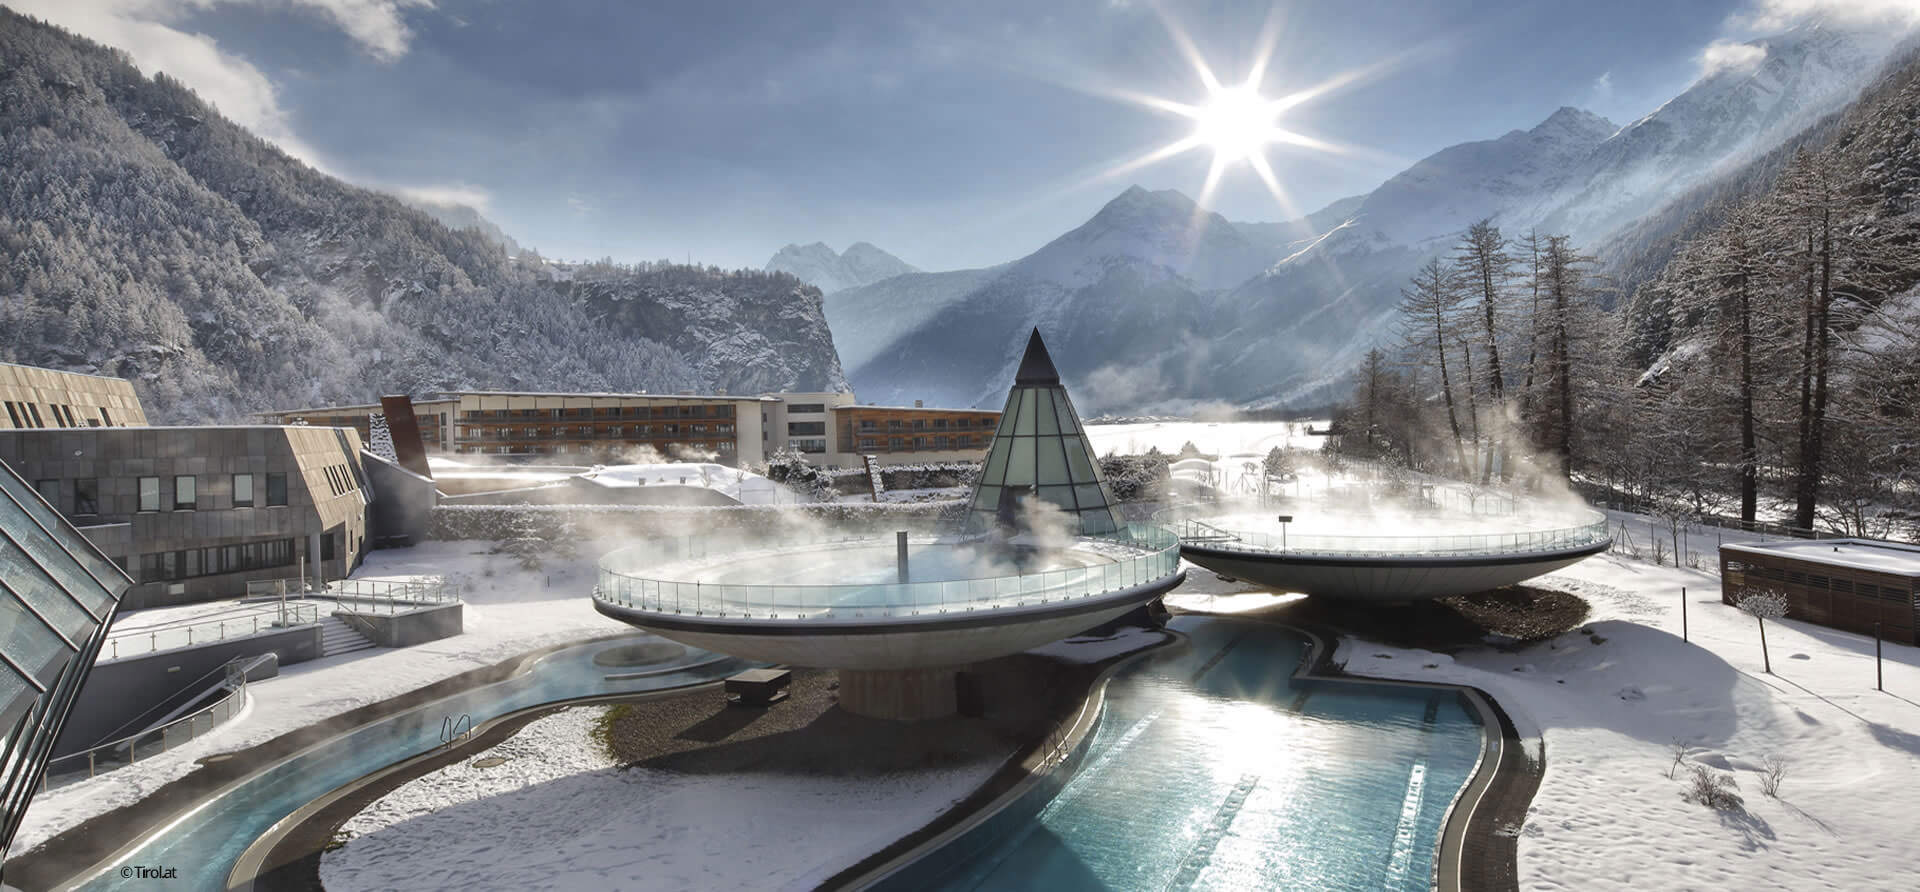 In Längenfeld, fans of wellness will get their money’s worth at the Aqua Dome spa in Tyrol.